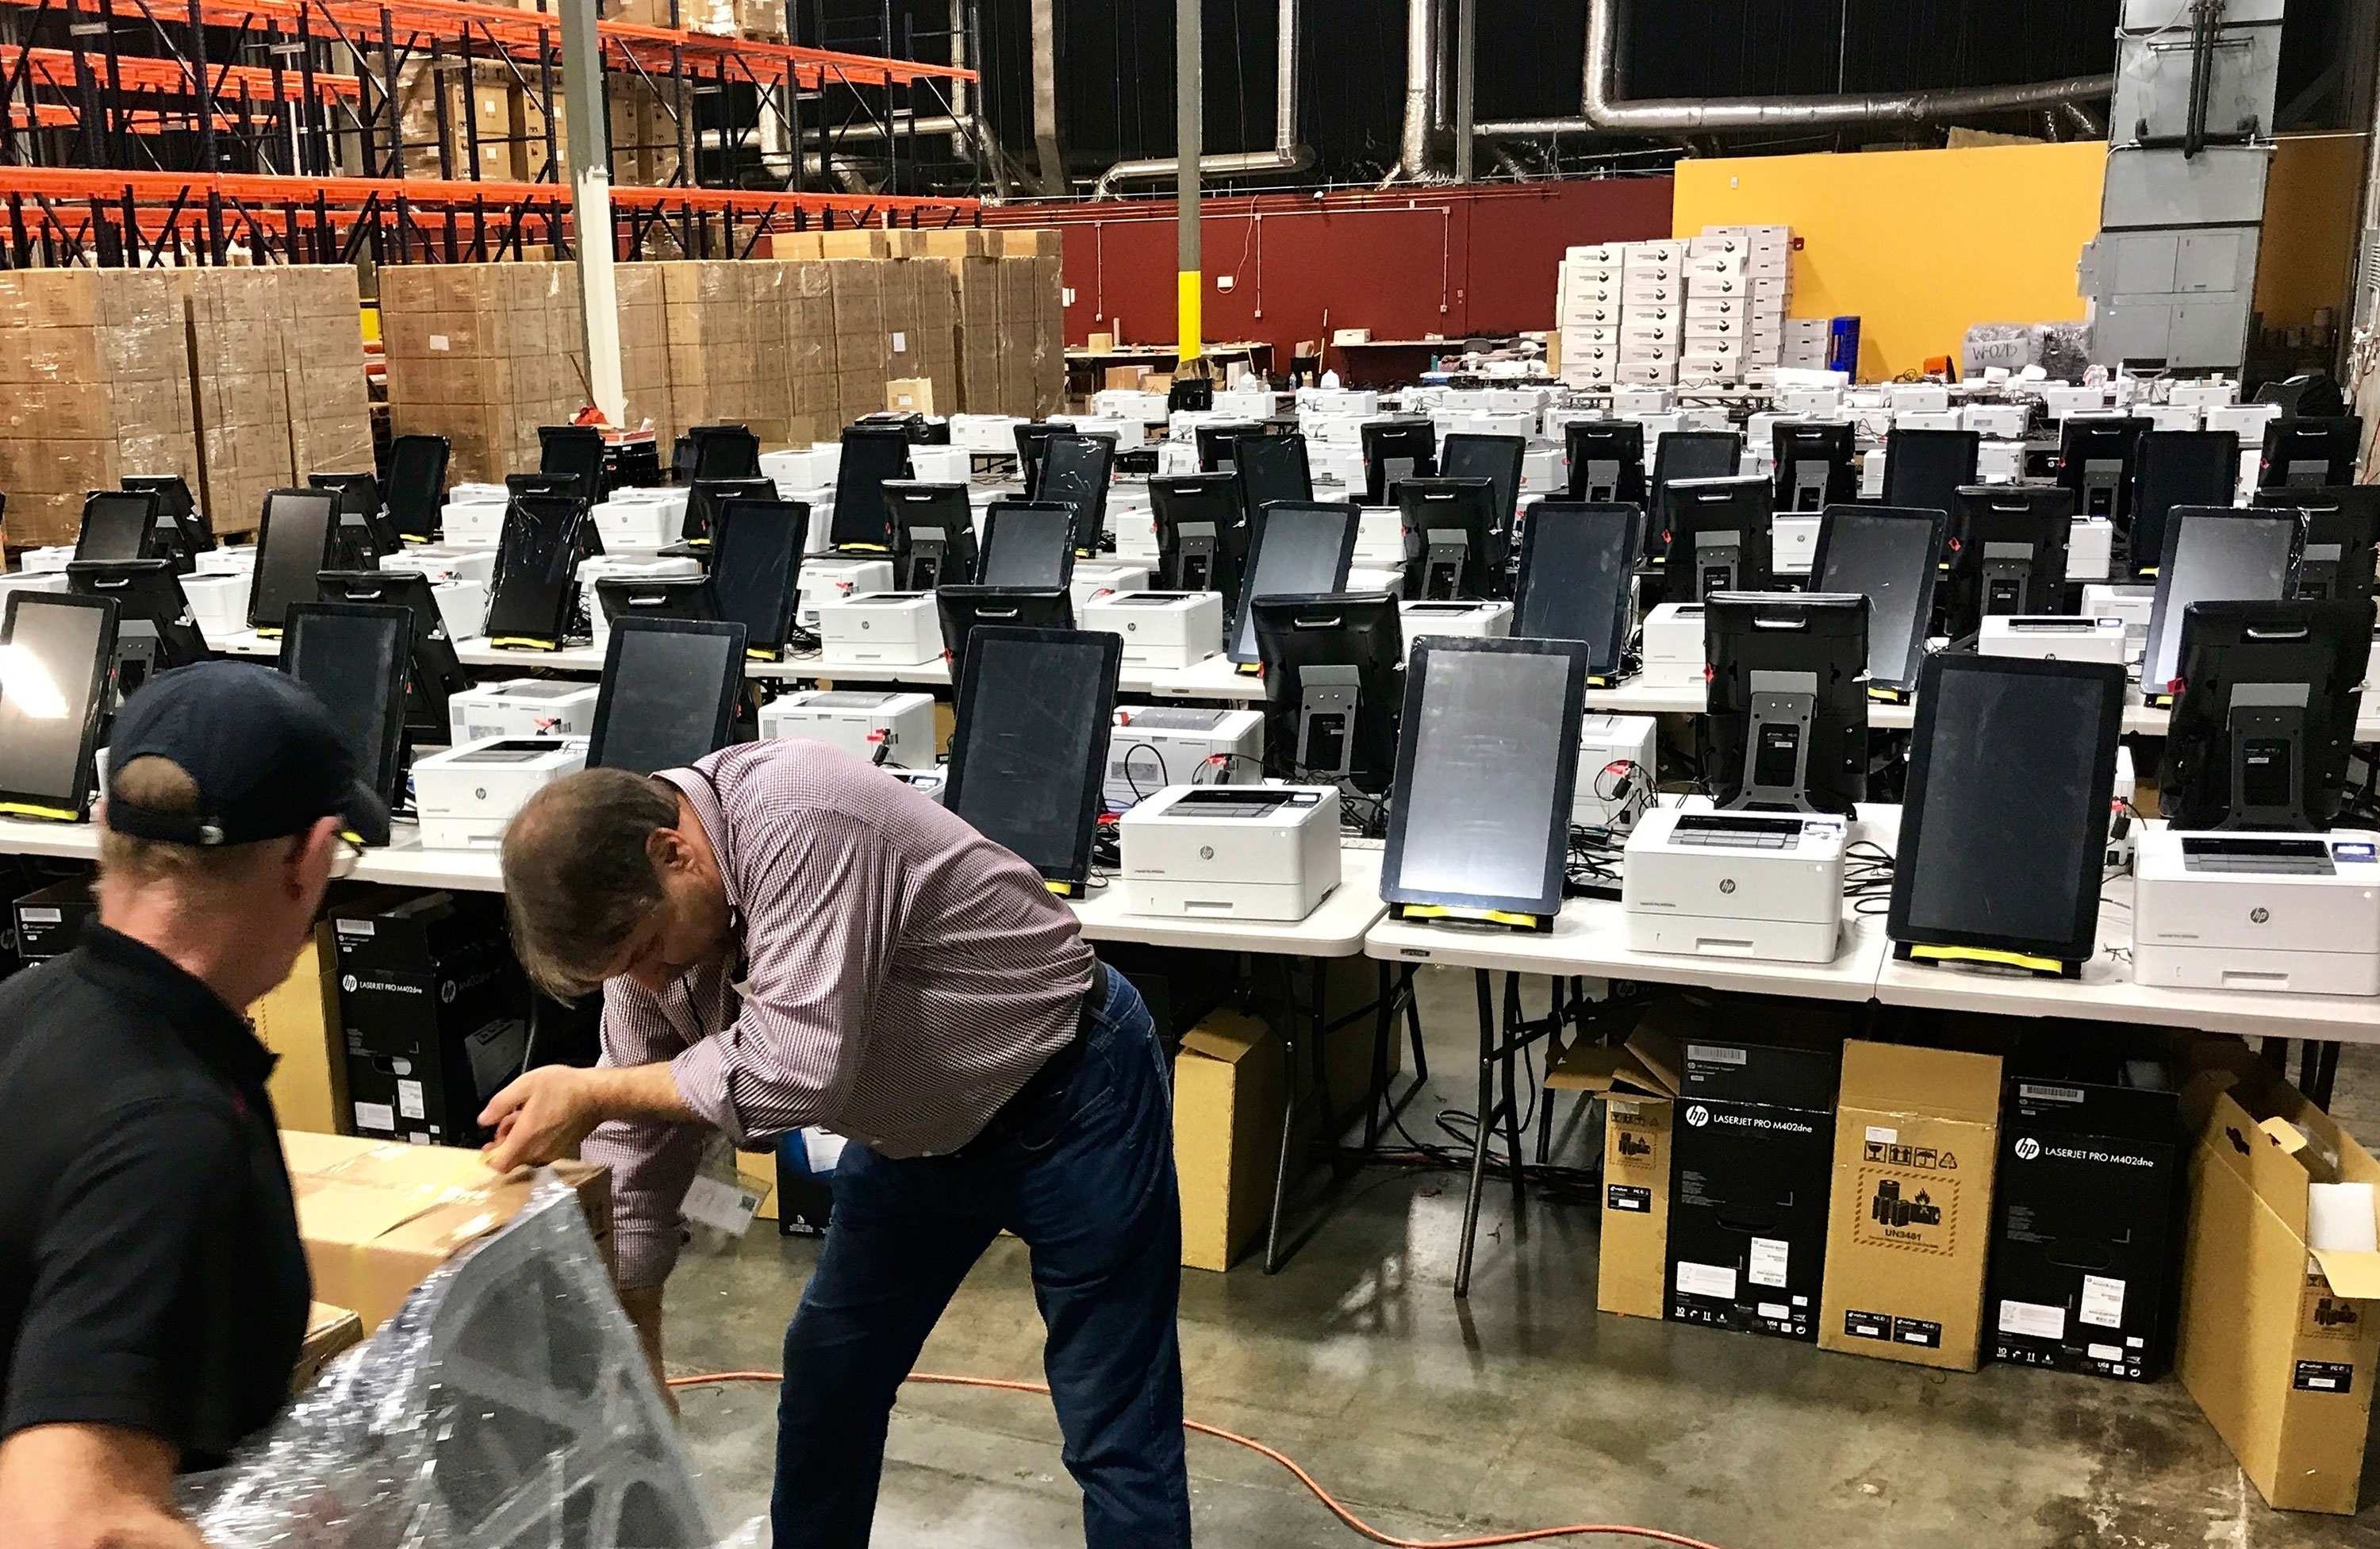 Voting equipment is prepared for testing in Atlanta on February 14 before being shipped to various counties throughout Georgia.